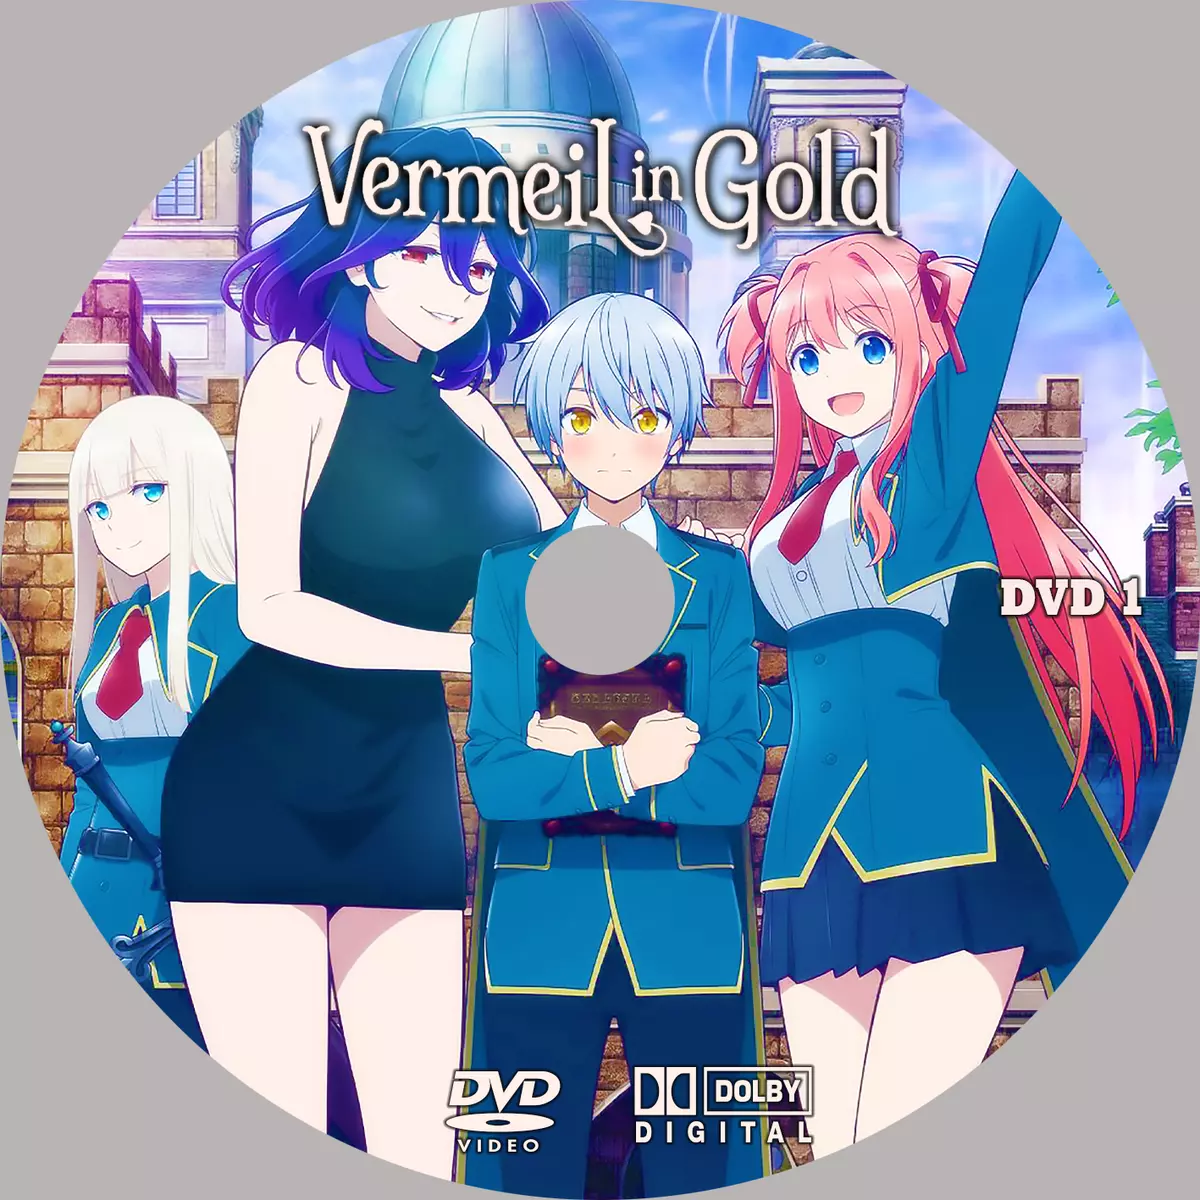 Anime Like Vermeil in Gold